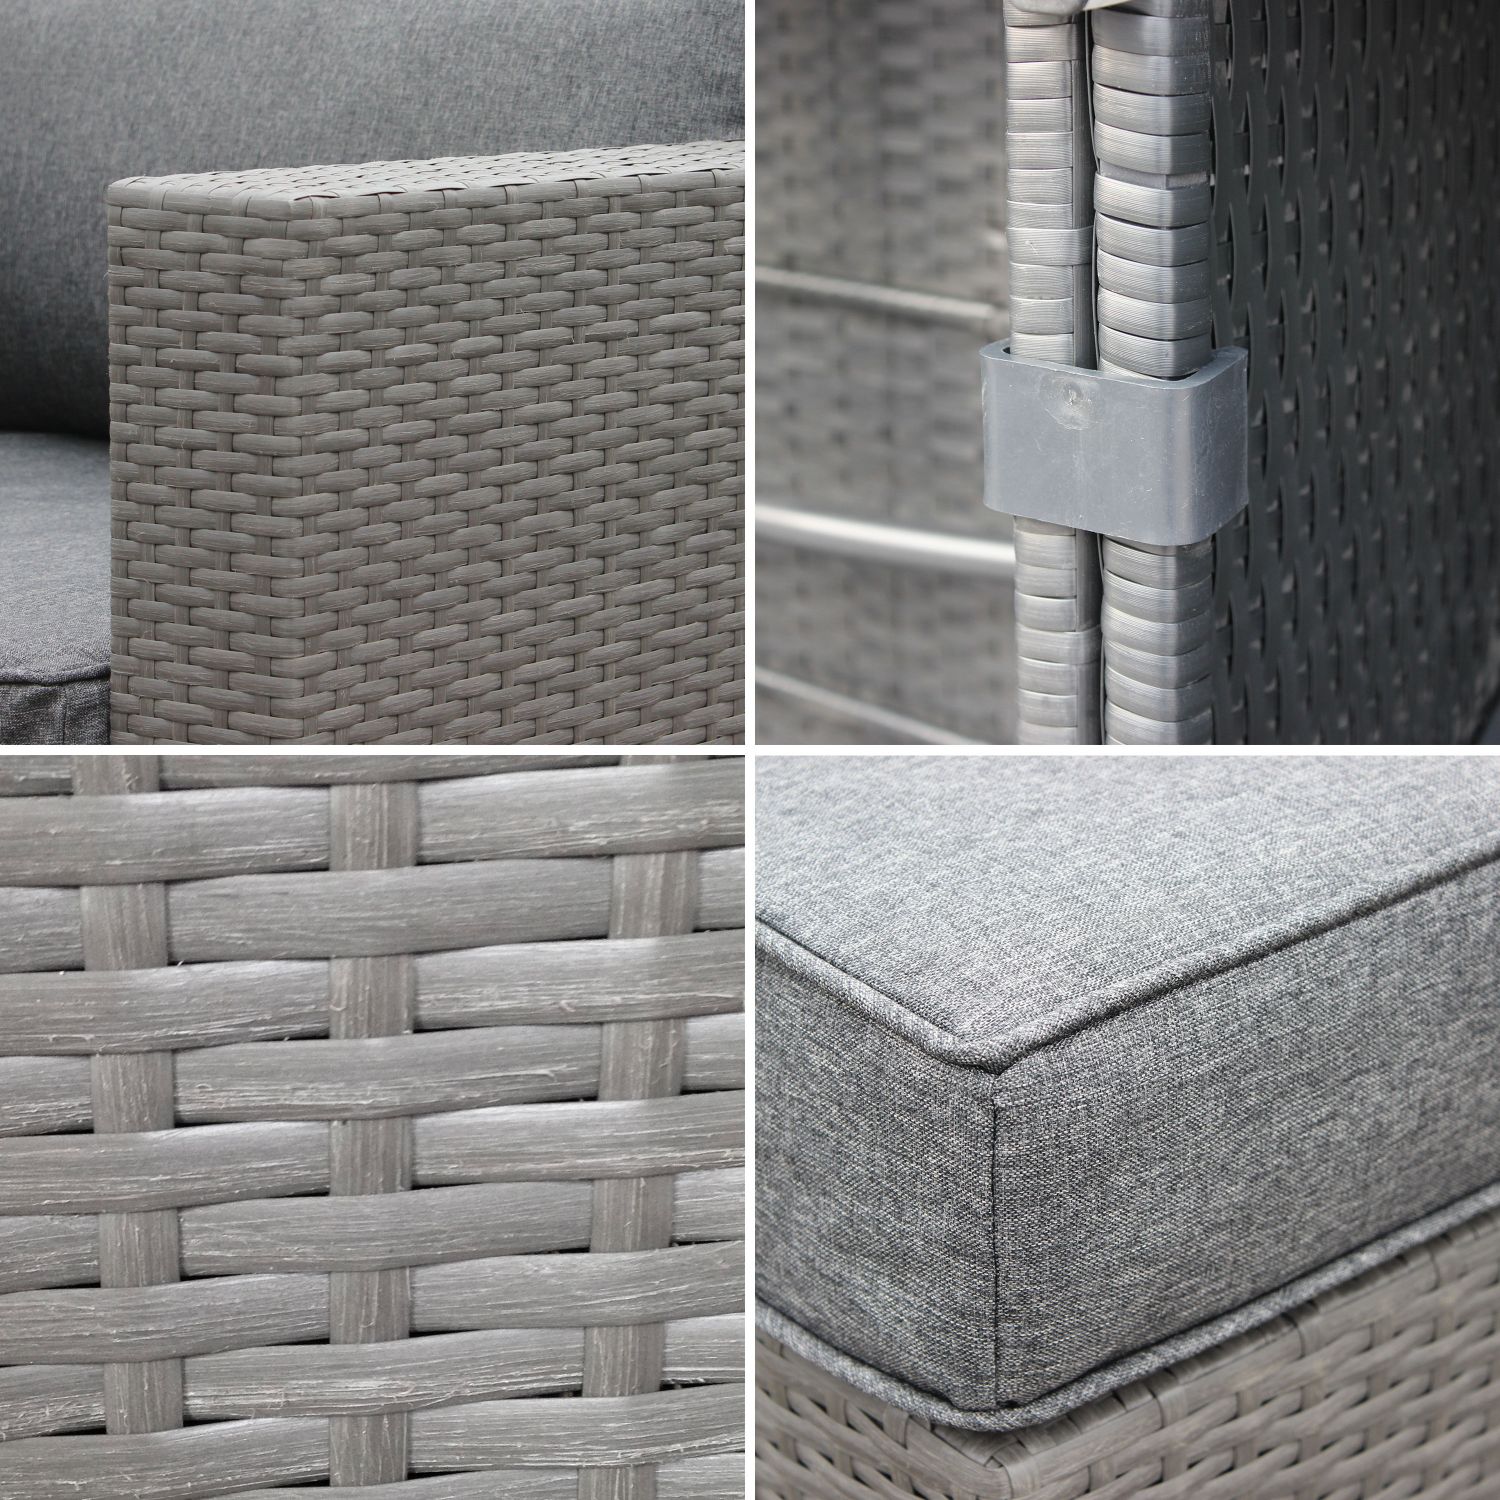 NAPOLI 5 Seater Outdoor Lounge Grey Wicker Grey Cushions